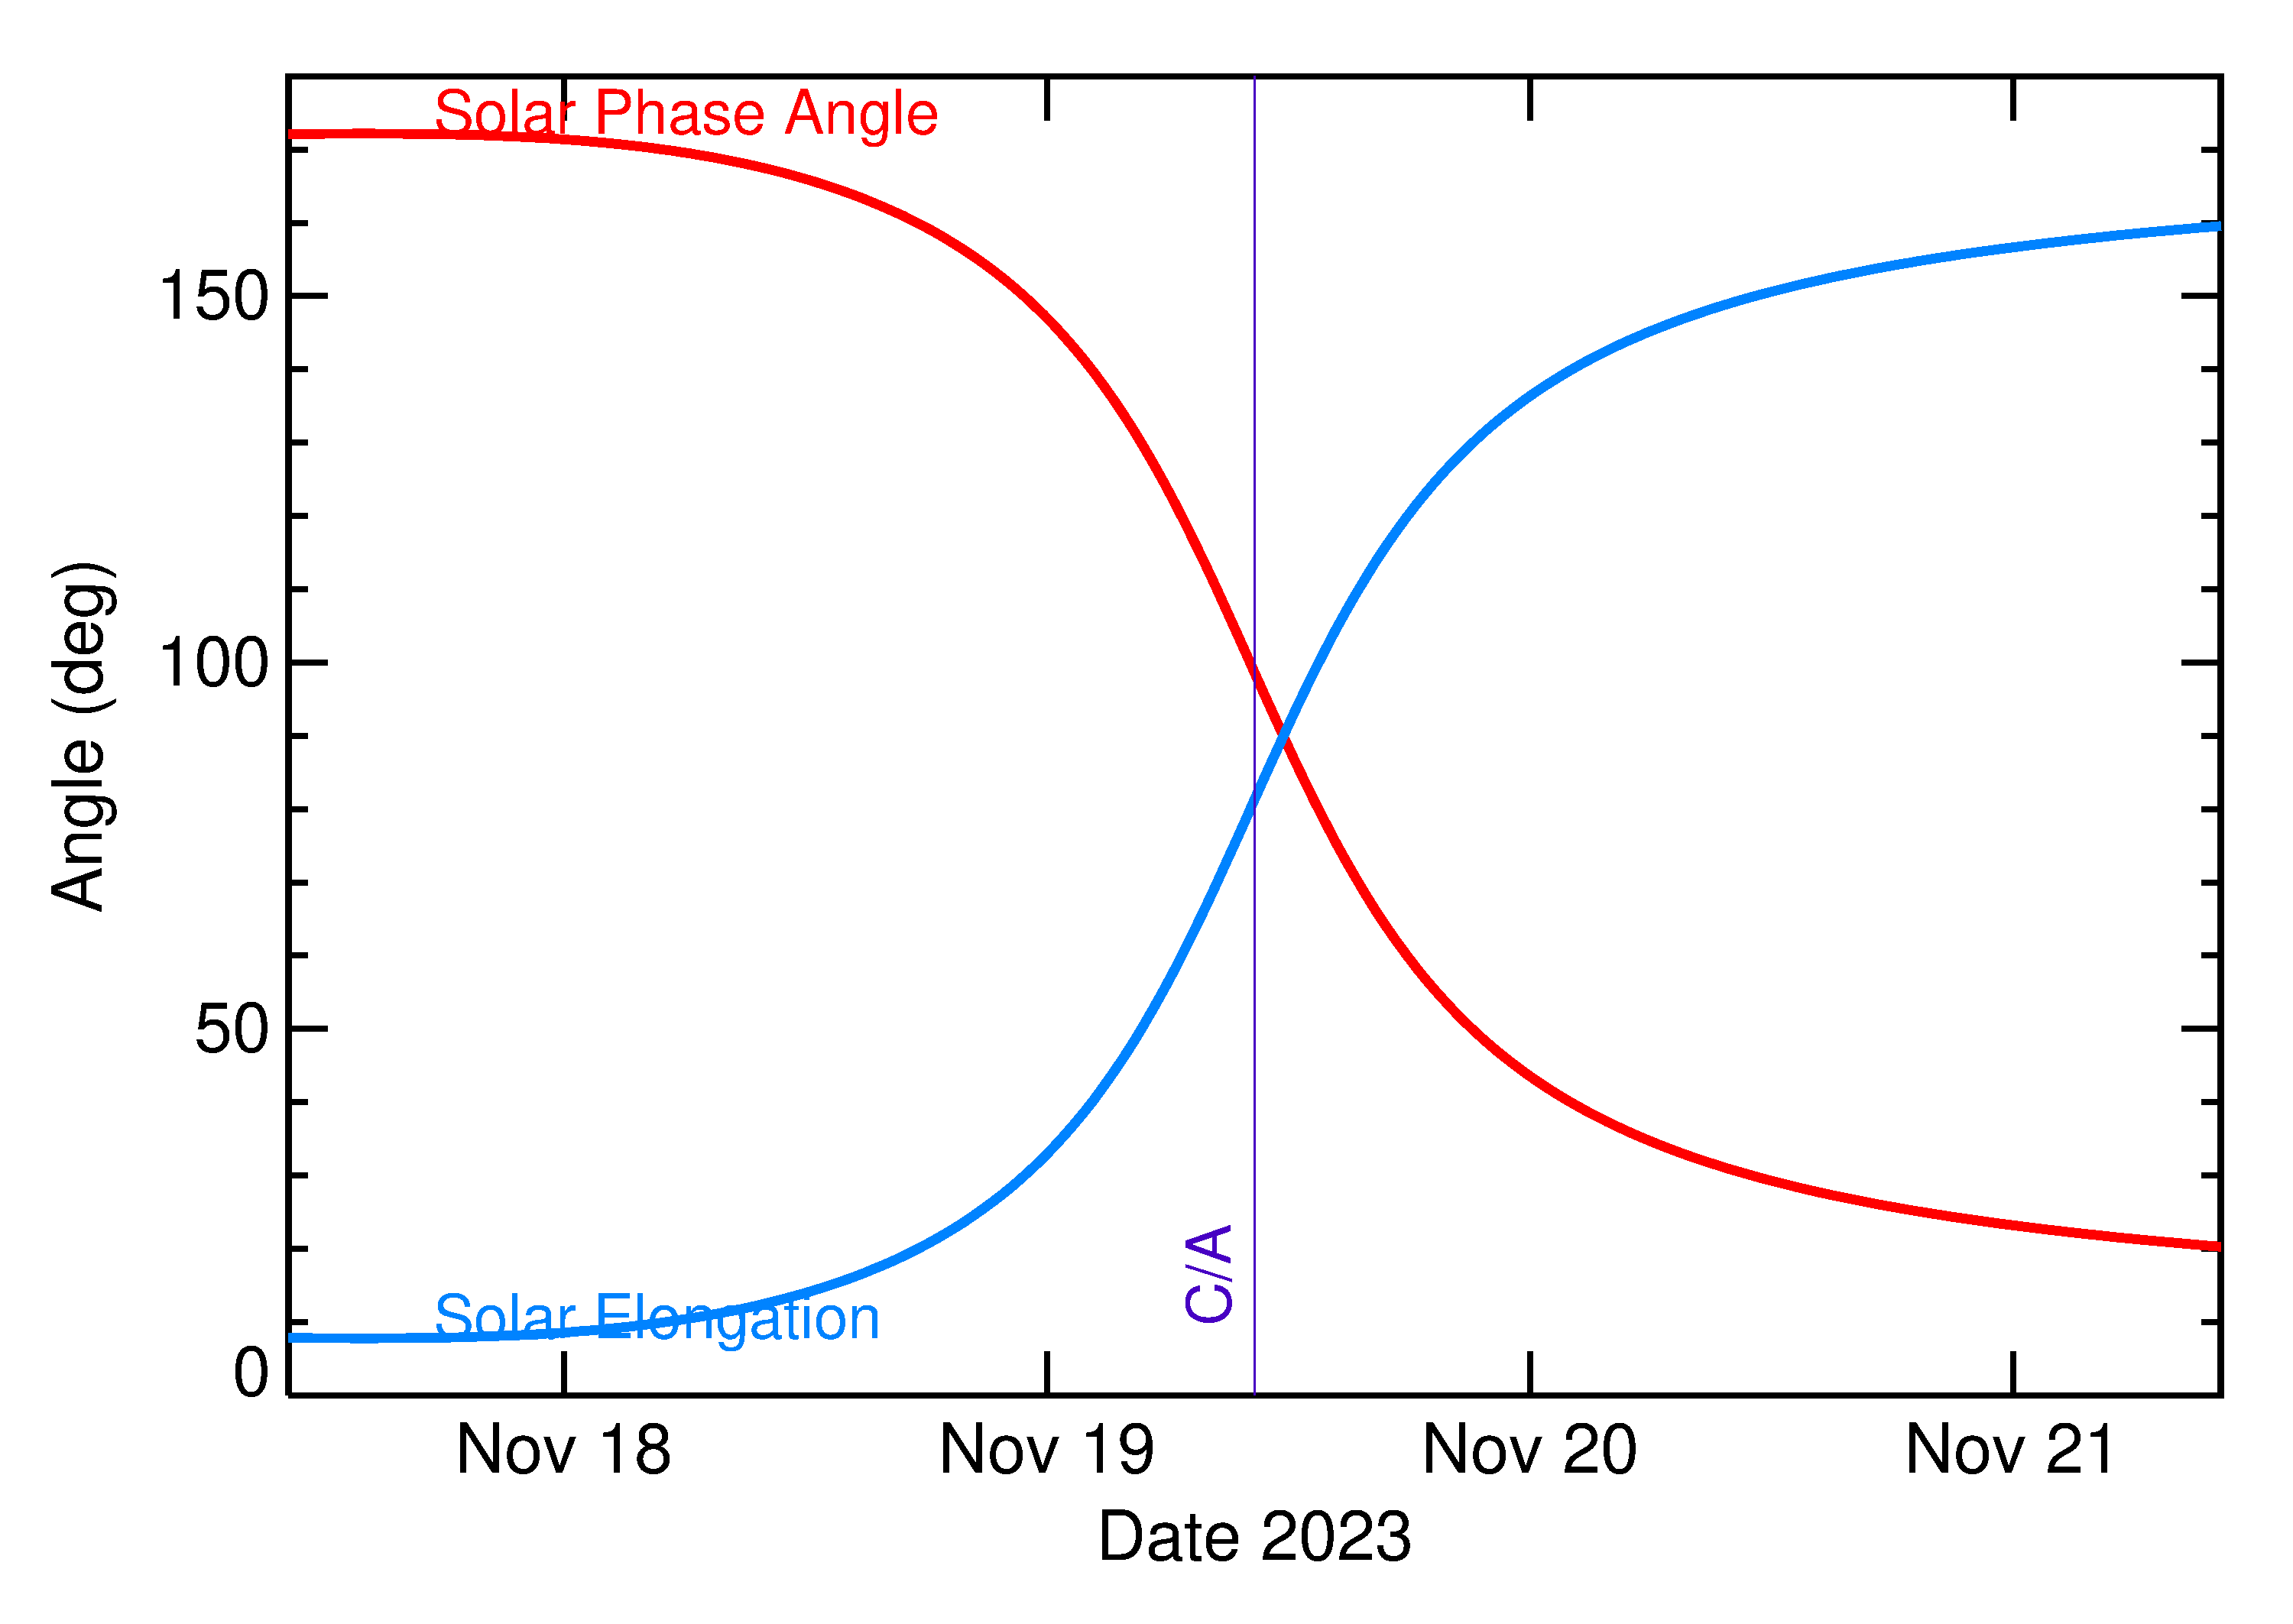 Solar Elongation and Solar Phase Angle of 2023 WE2 in the days around closest approach